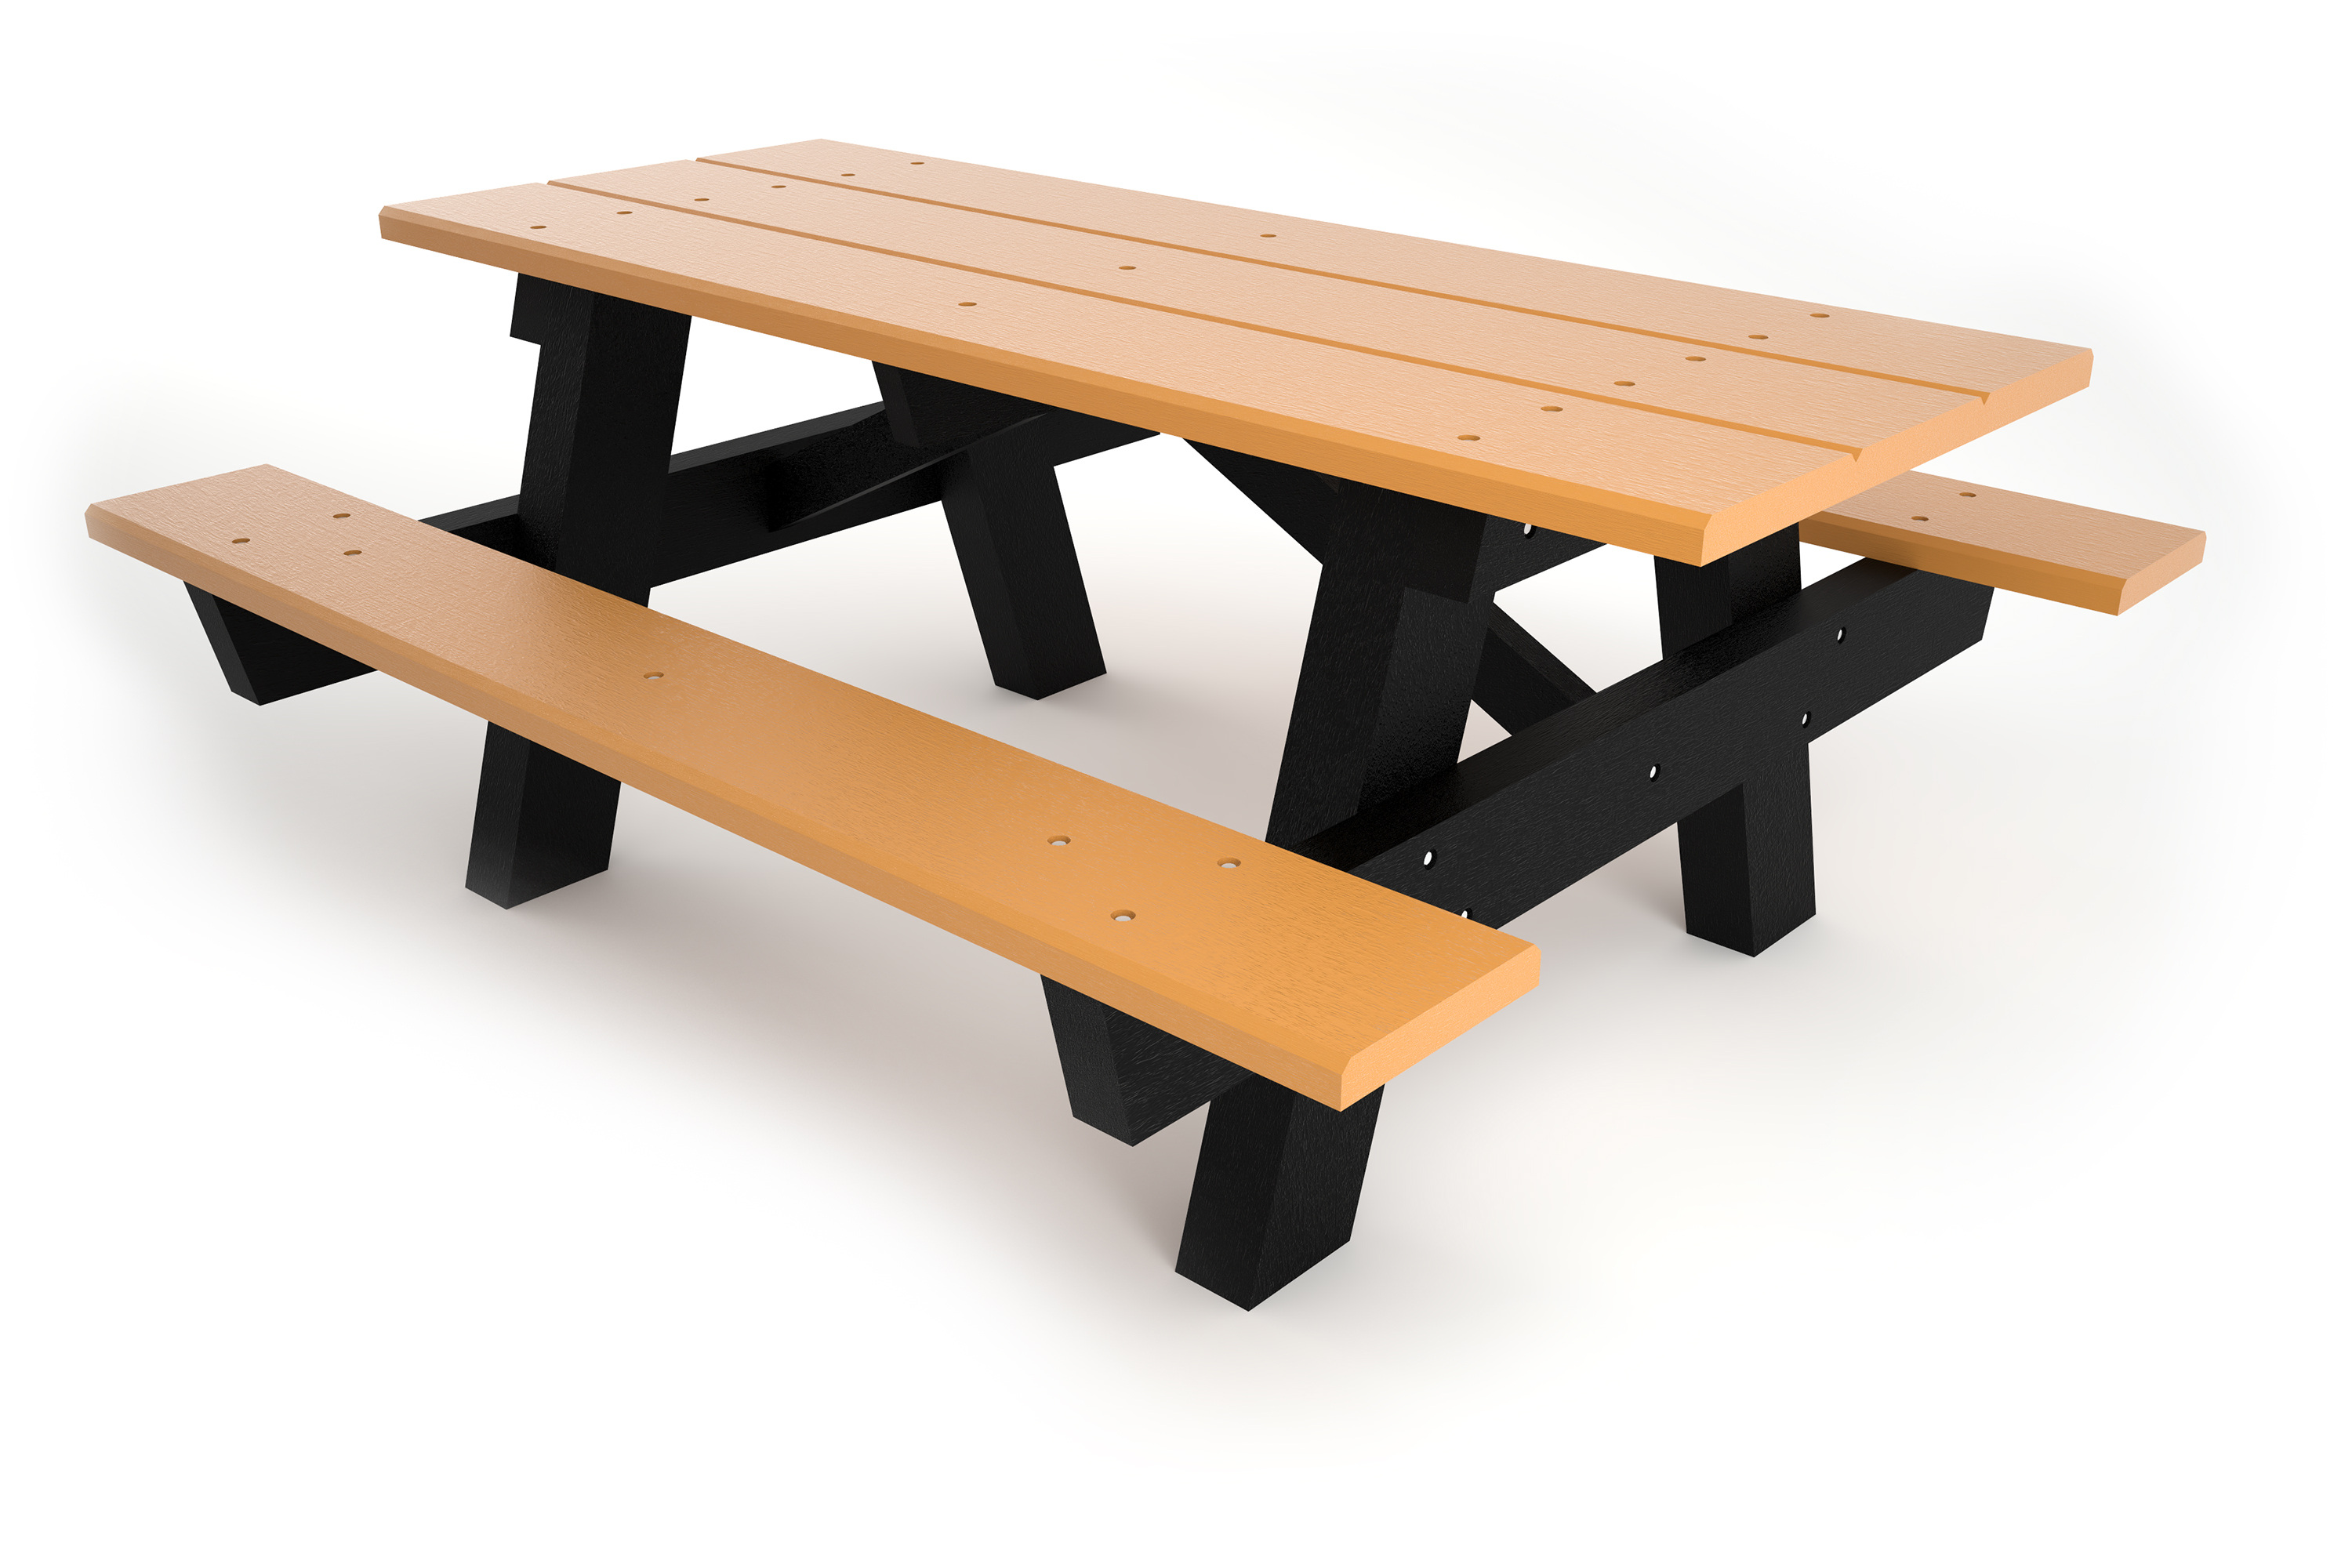 A Frame Table - Right Side CED